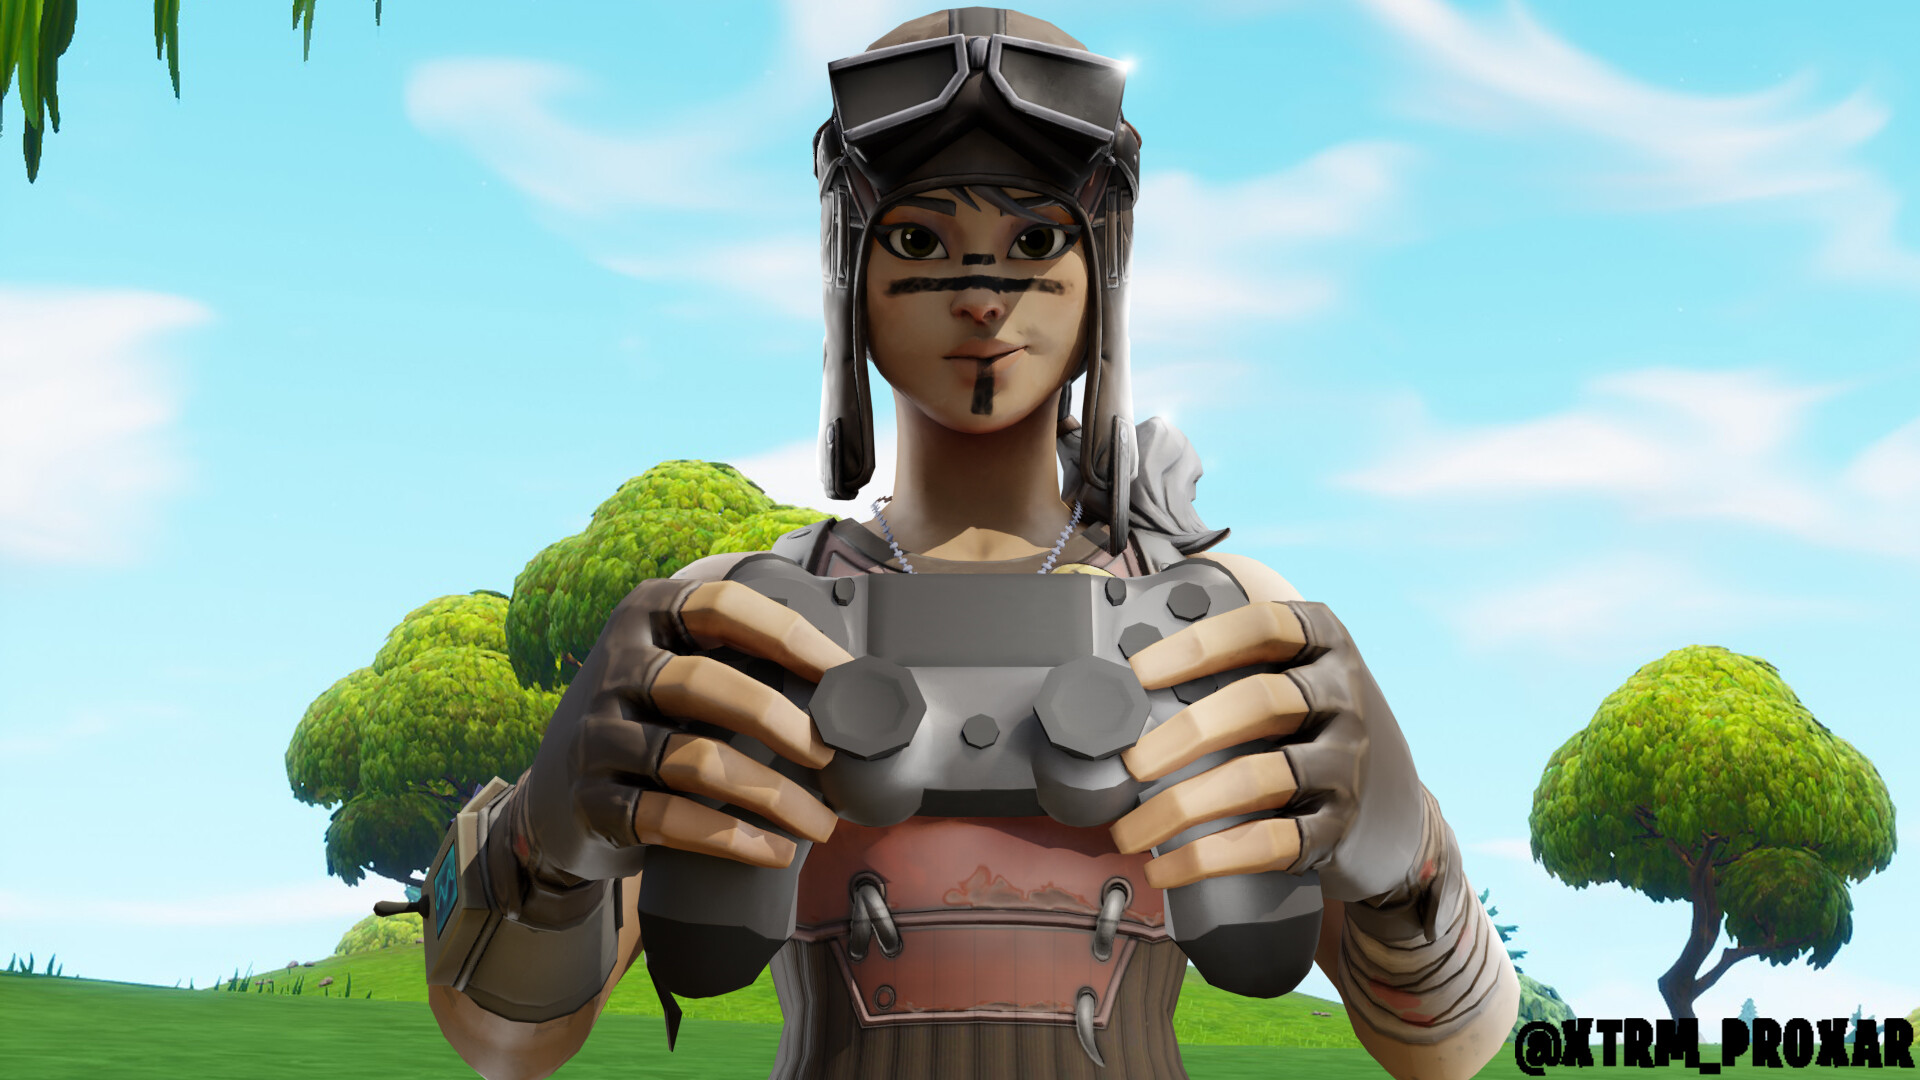 Heres a Renegade Raider wallpaper for you all  rShrineOfHeadHunter